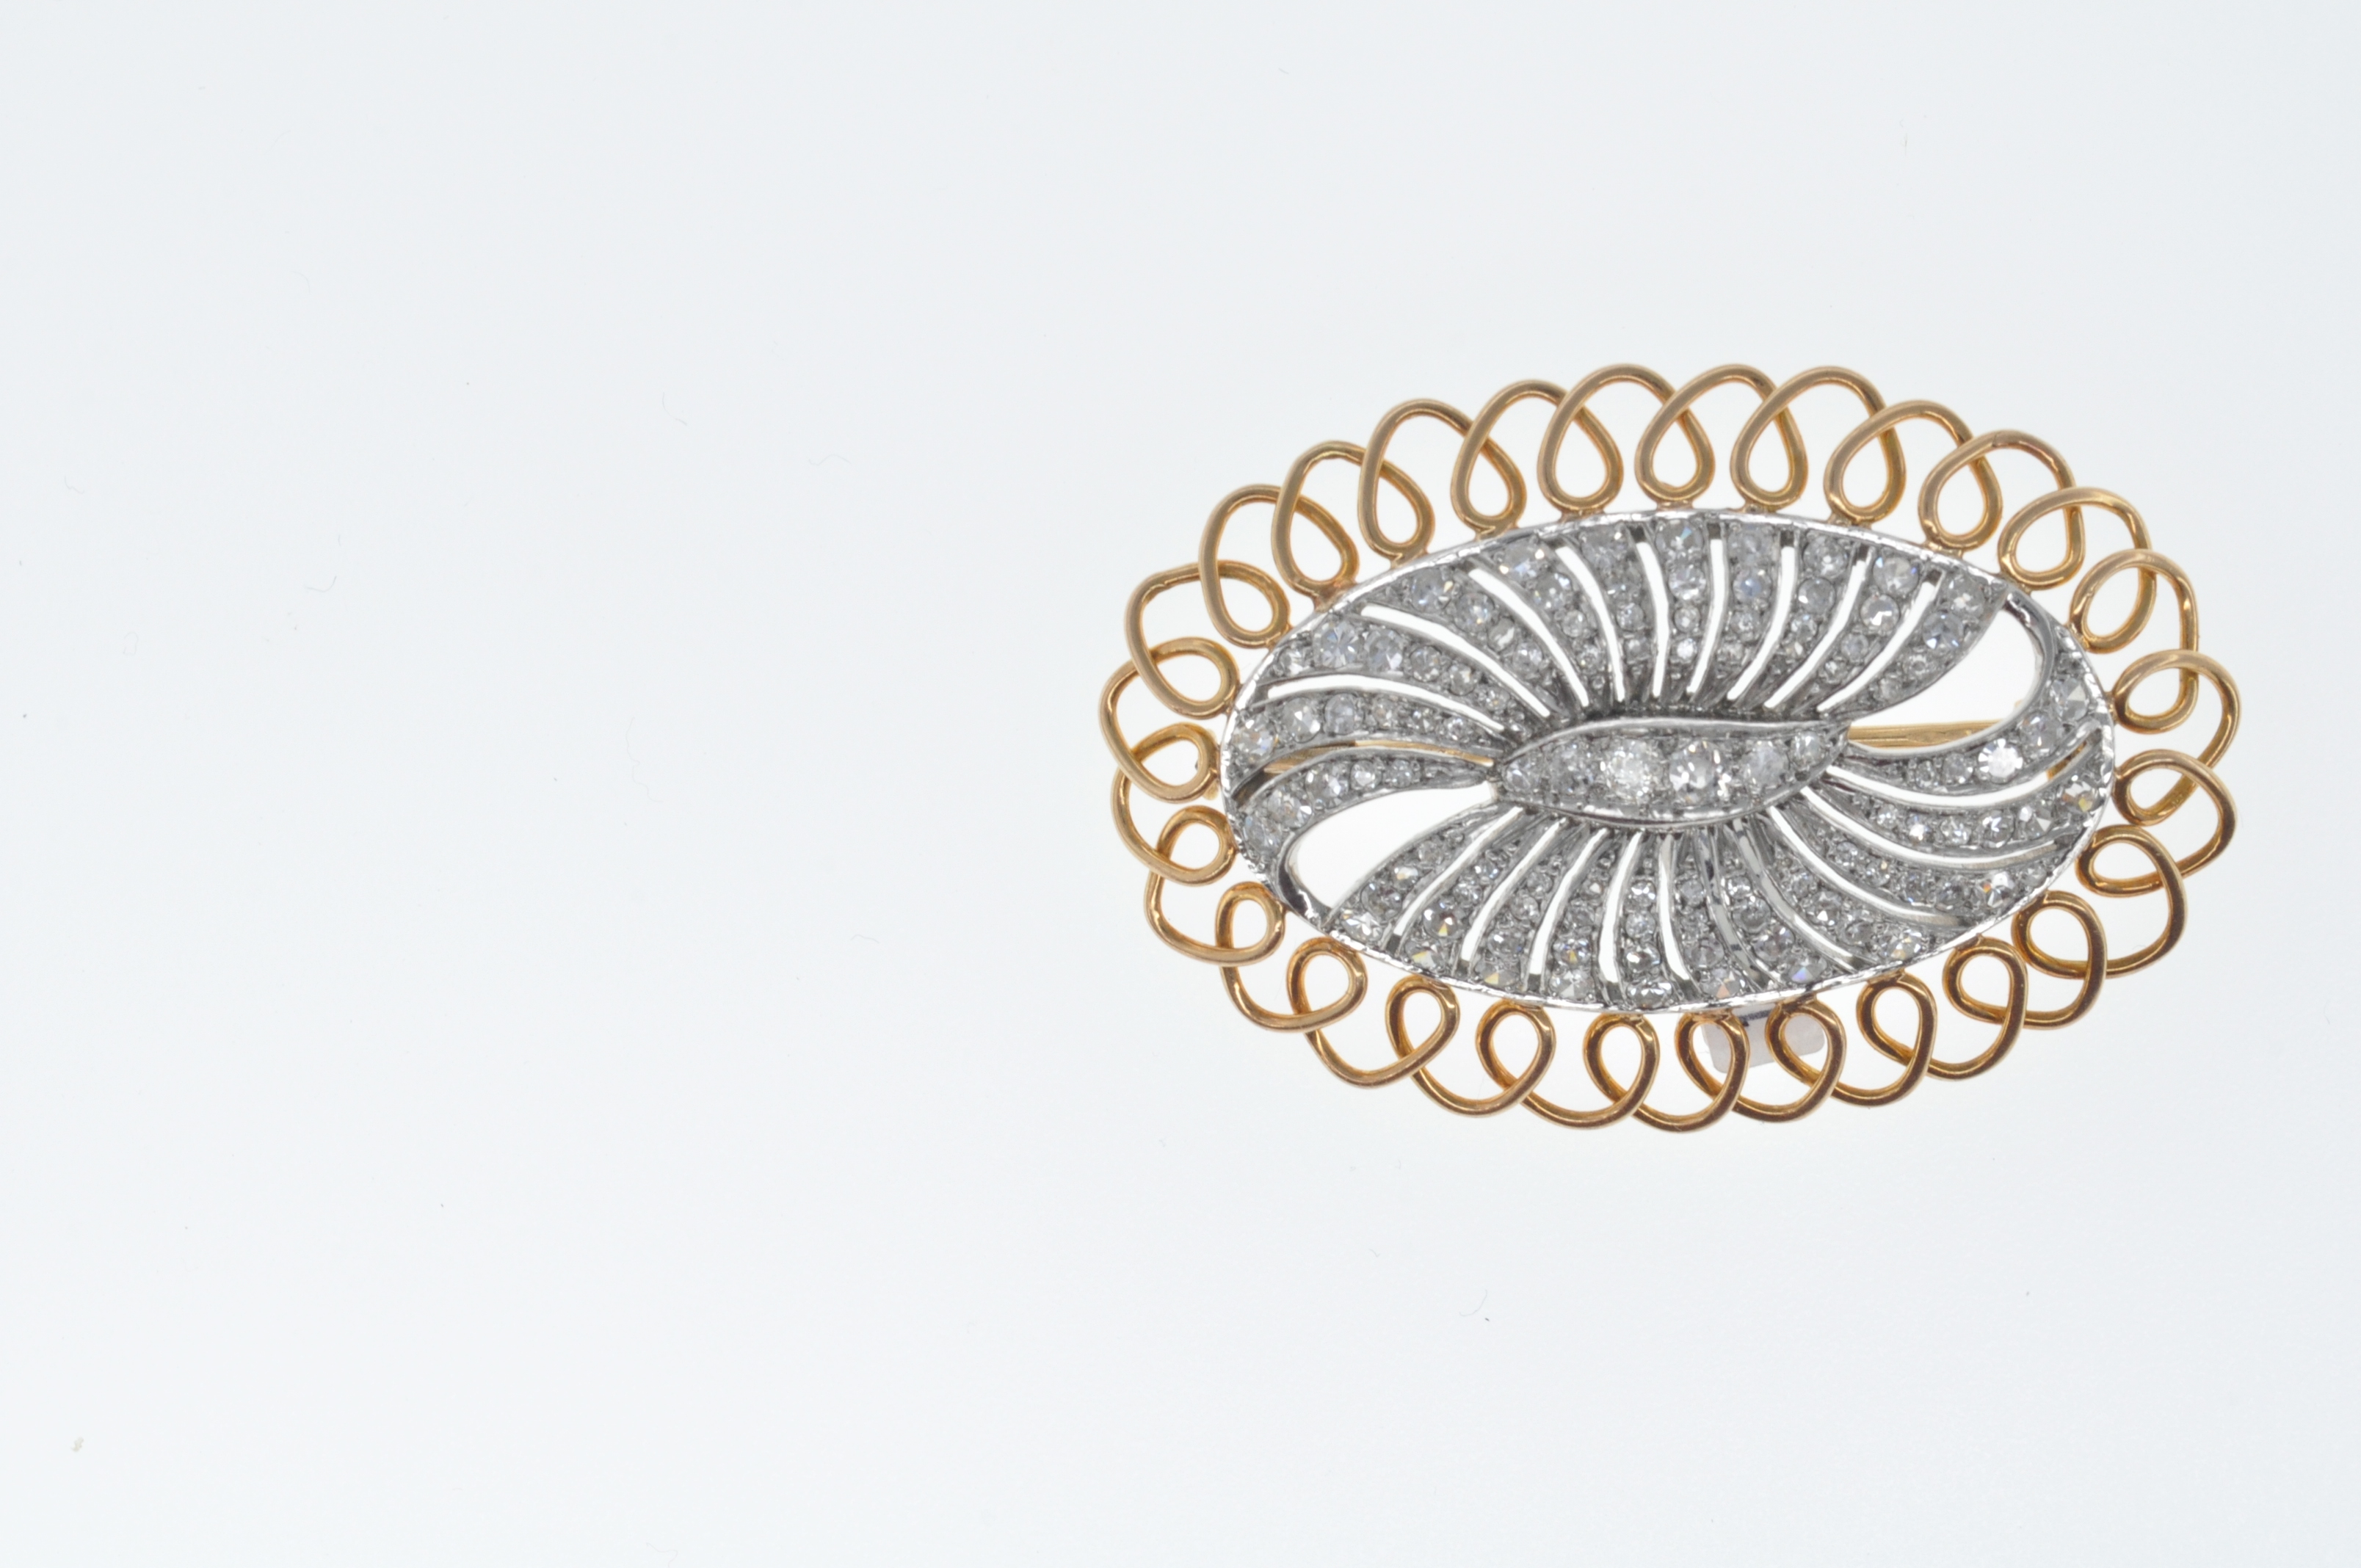 VINTAGE GOLD AND DIAMOND OVAL BROOCH - Image 4 of 6